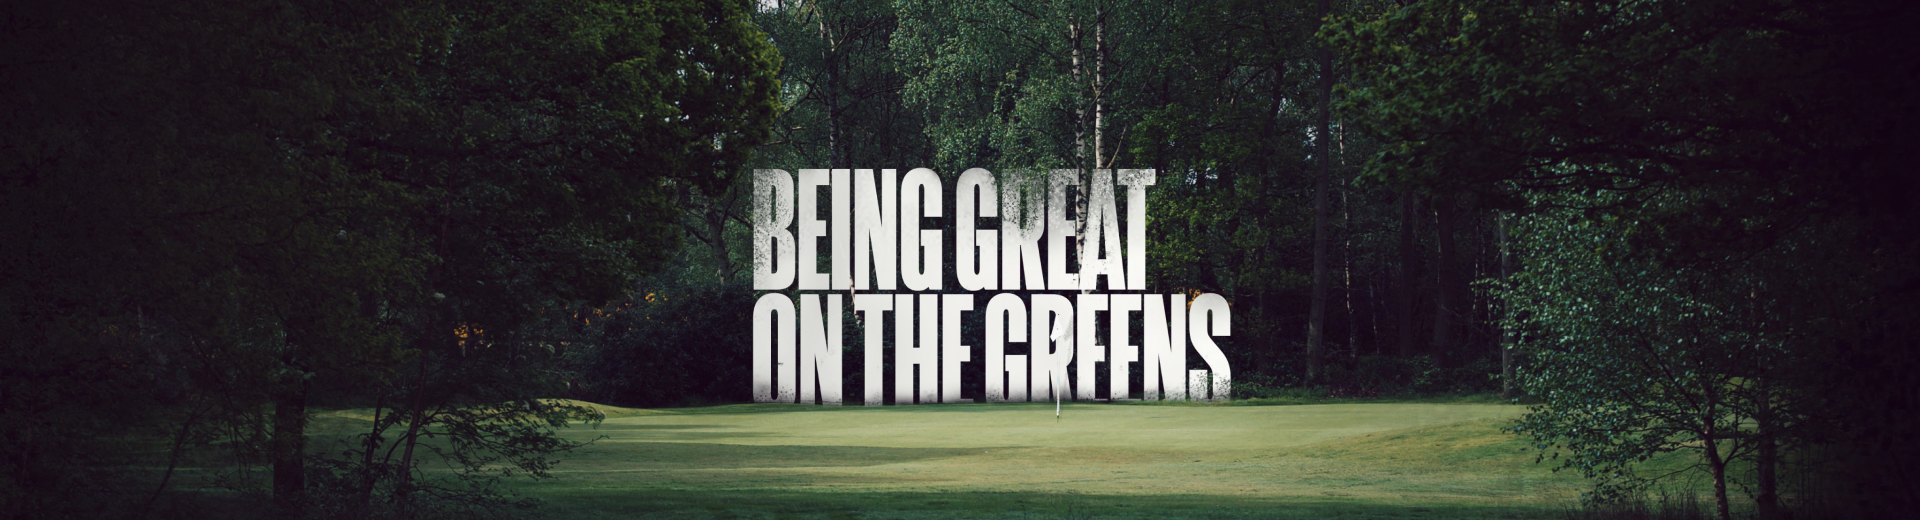 Being great on the greens by Karl Morris